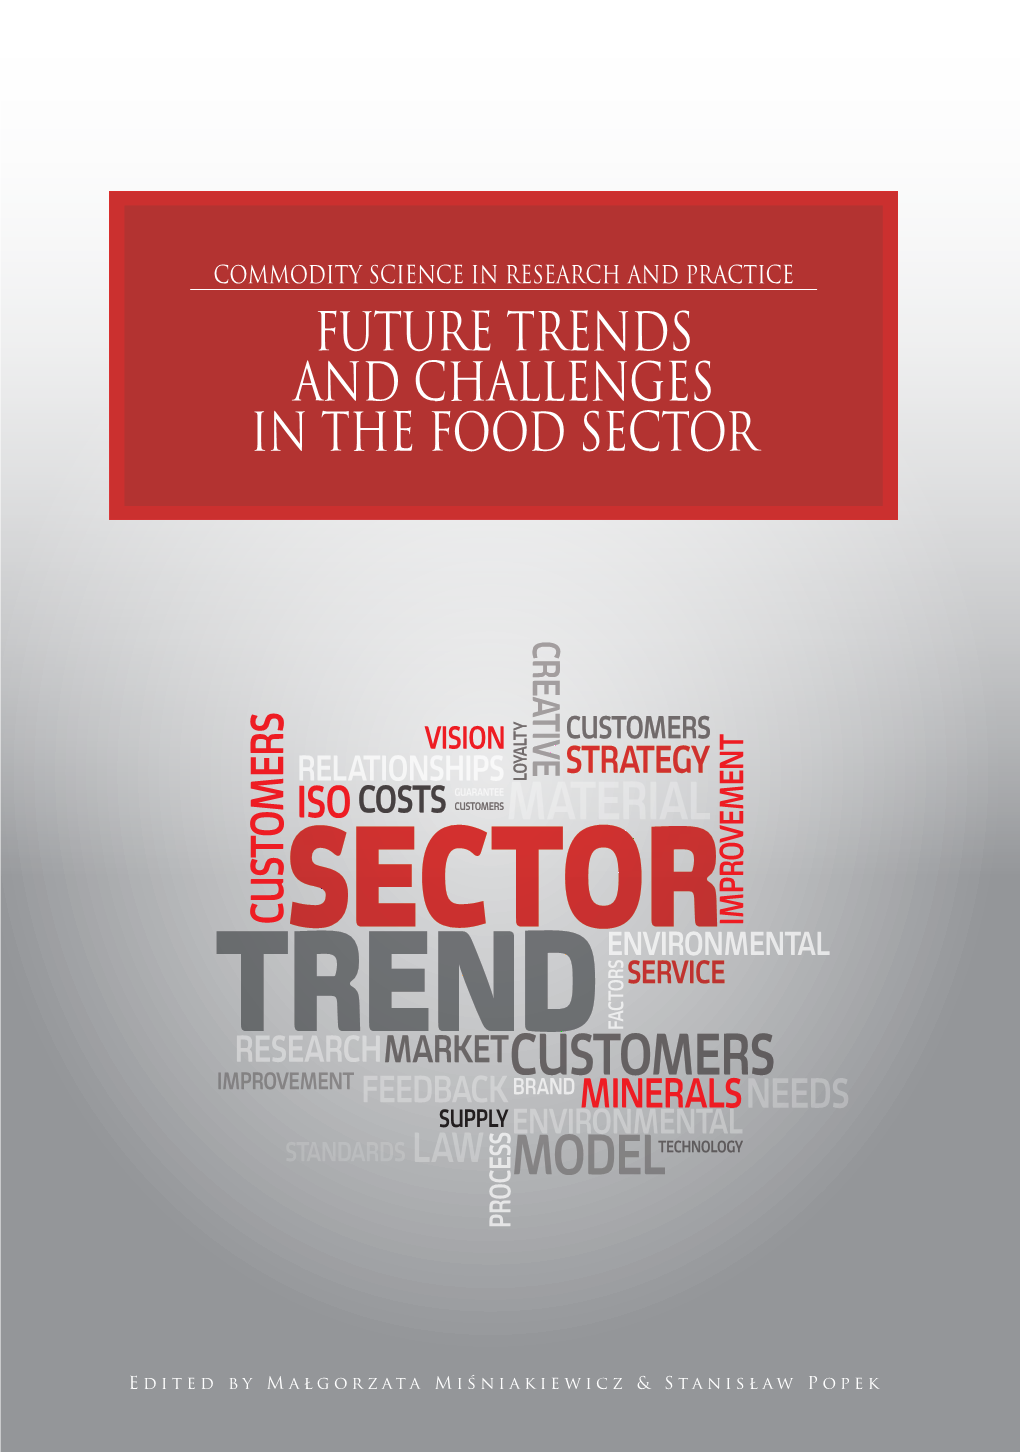 Future Trends and Challenges in the Food Sector